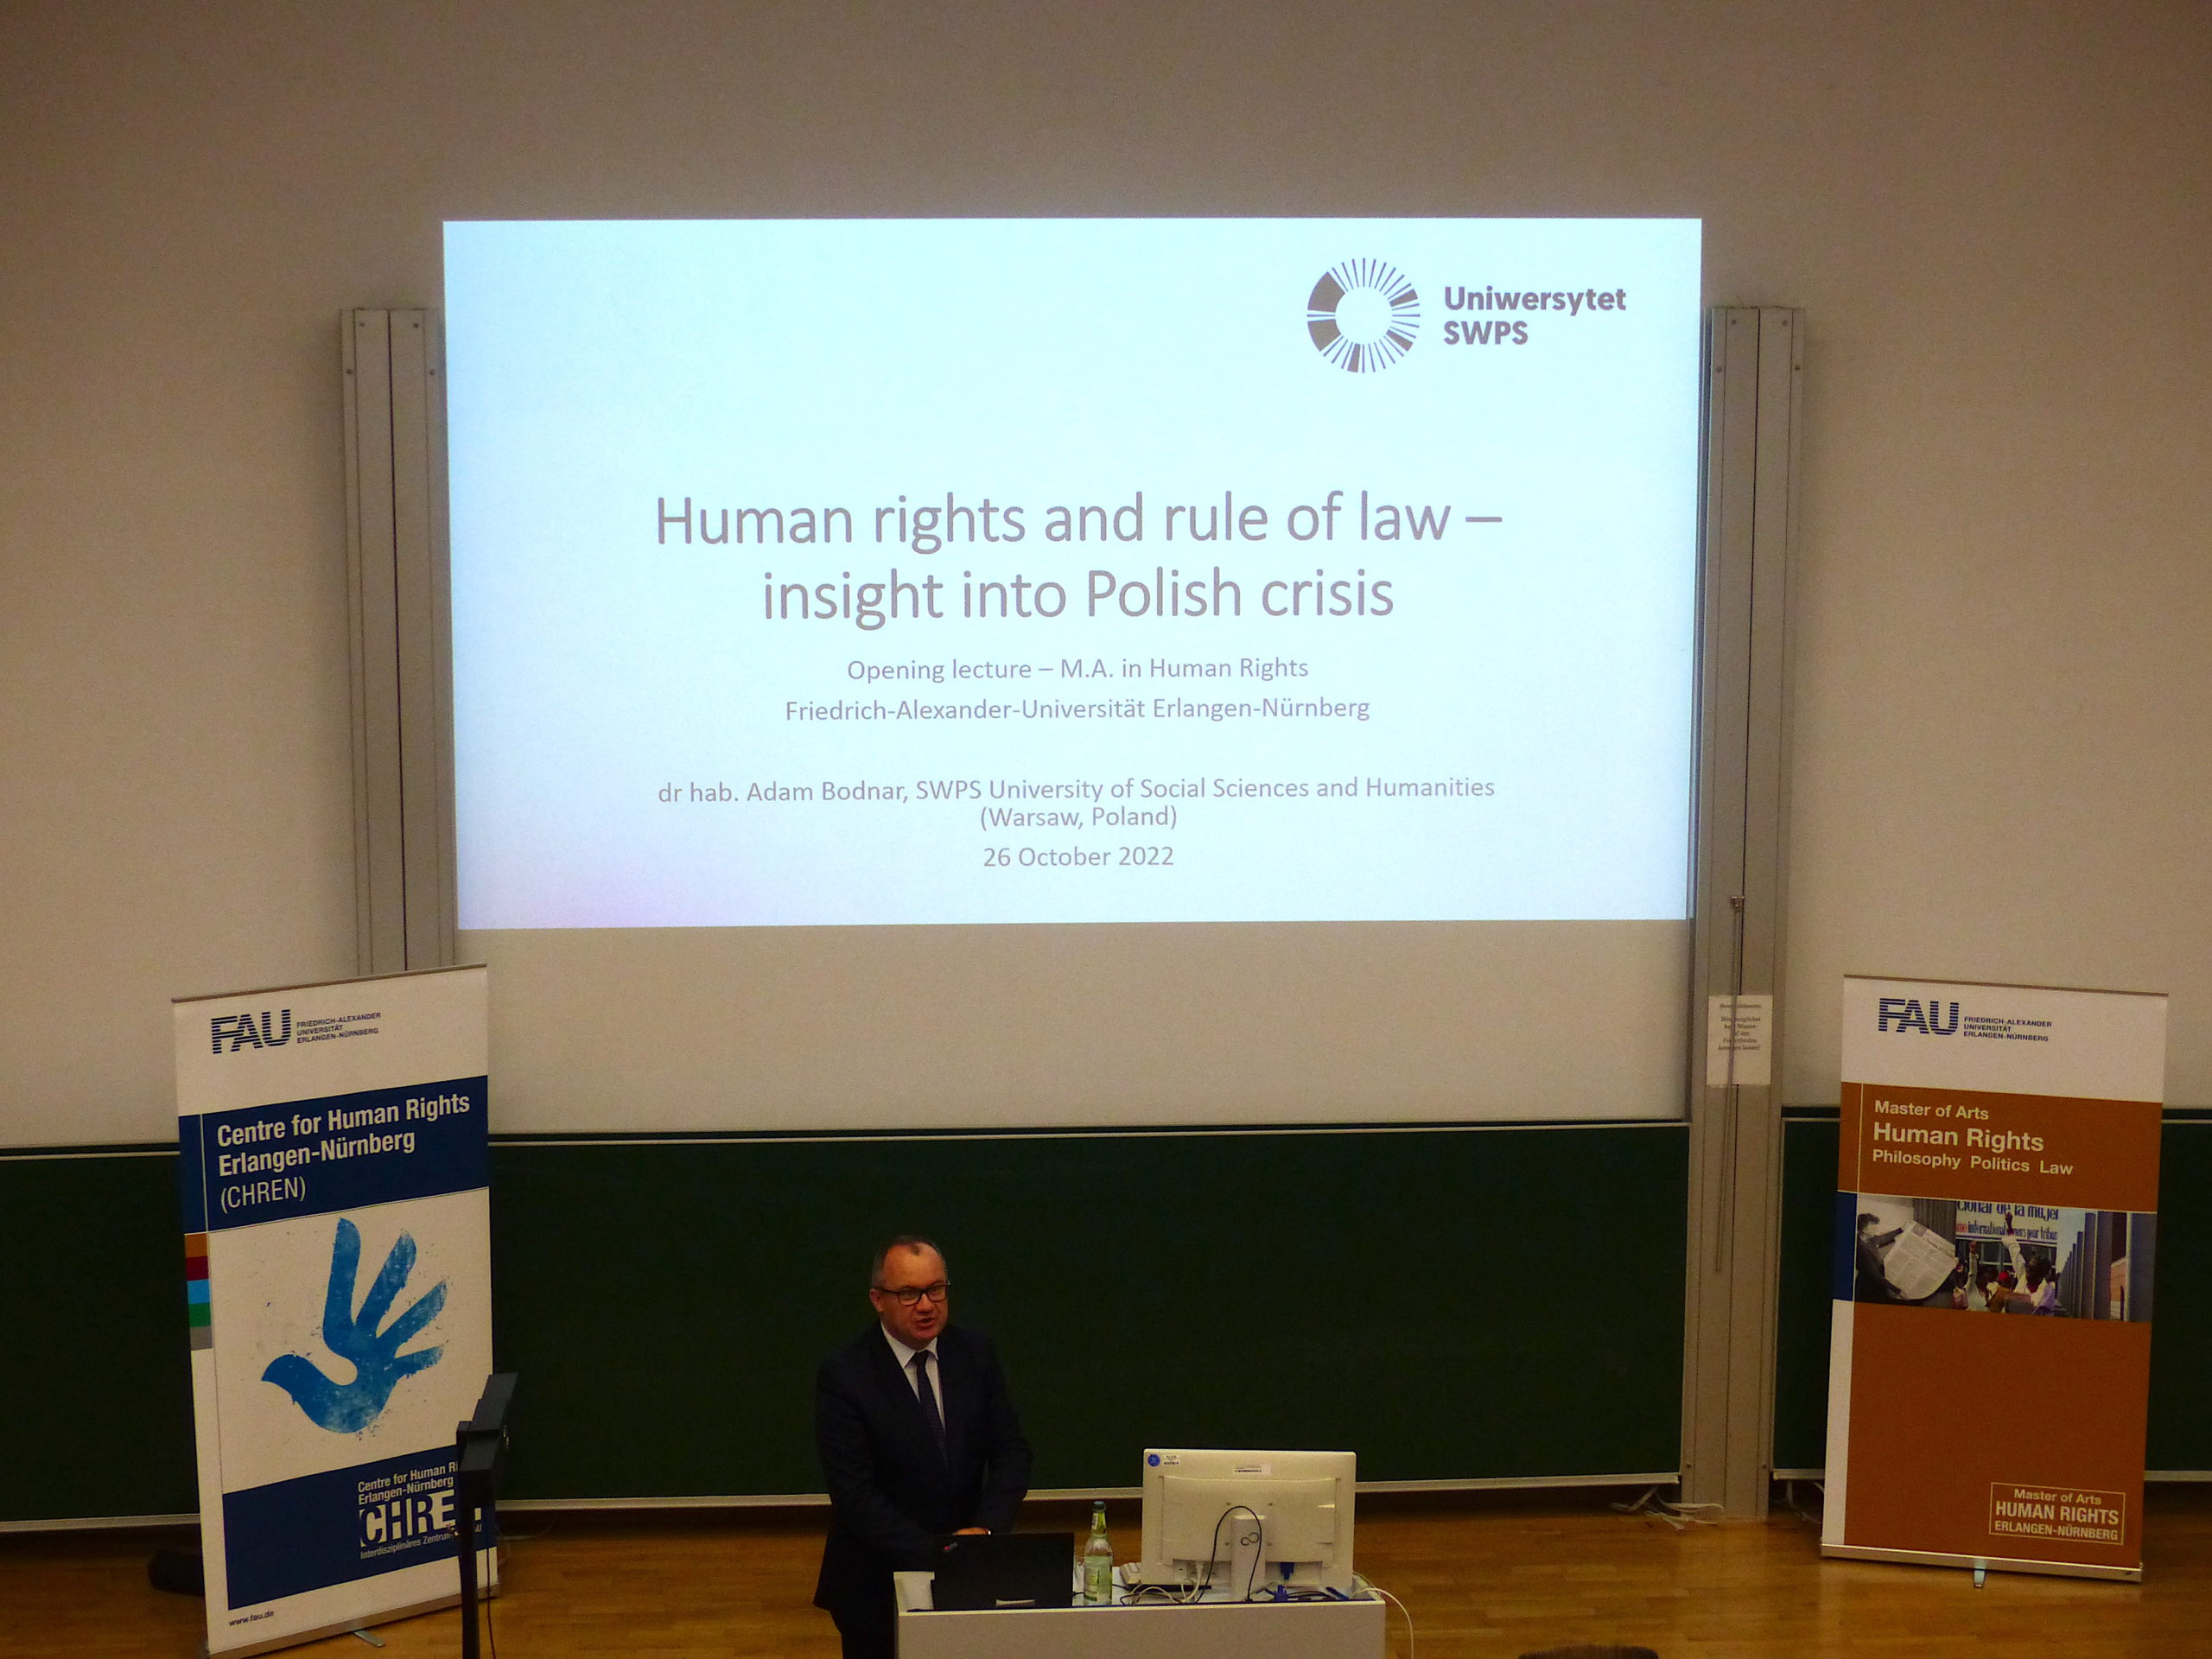 Opening Lecture PowerPoint "Human rights and rule of law - insight into Polish crisis" by Adam Bodnar, SWPS University of Social Sciences and Humanities (Warsaw, Poland)